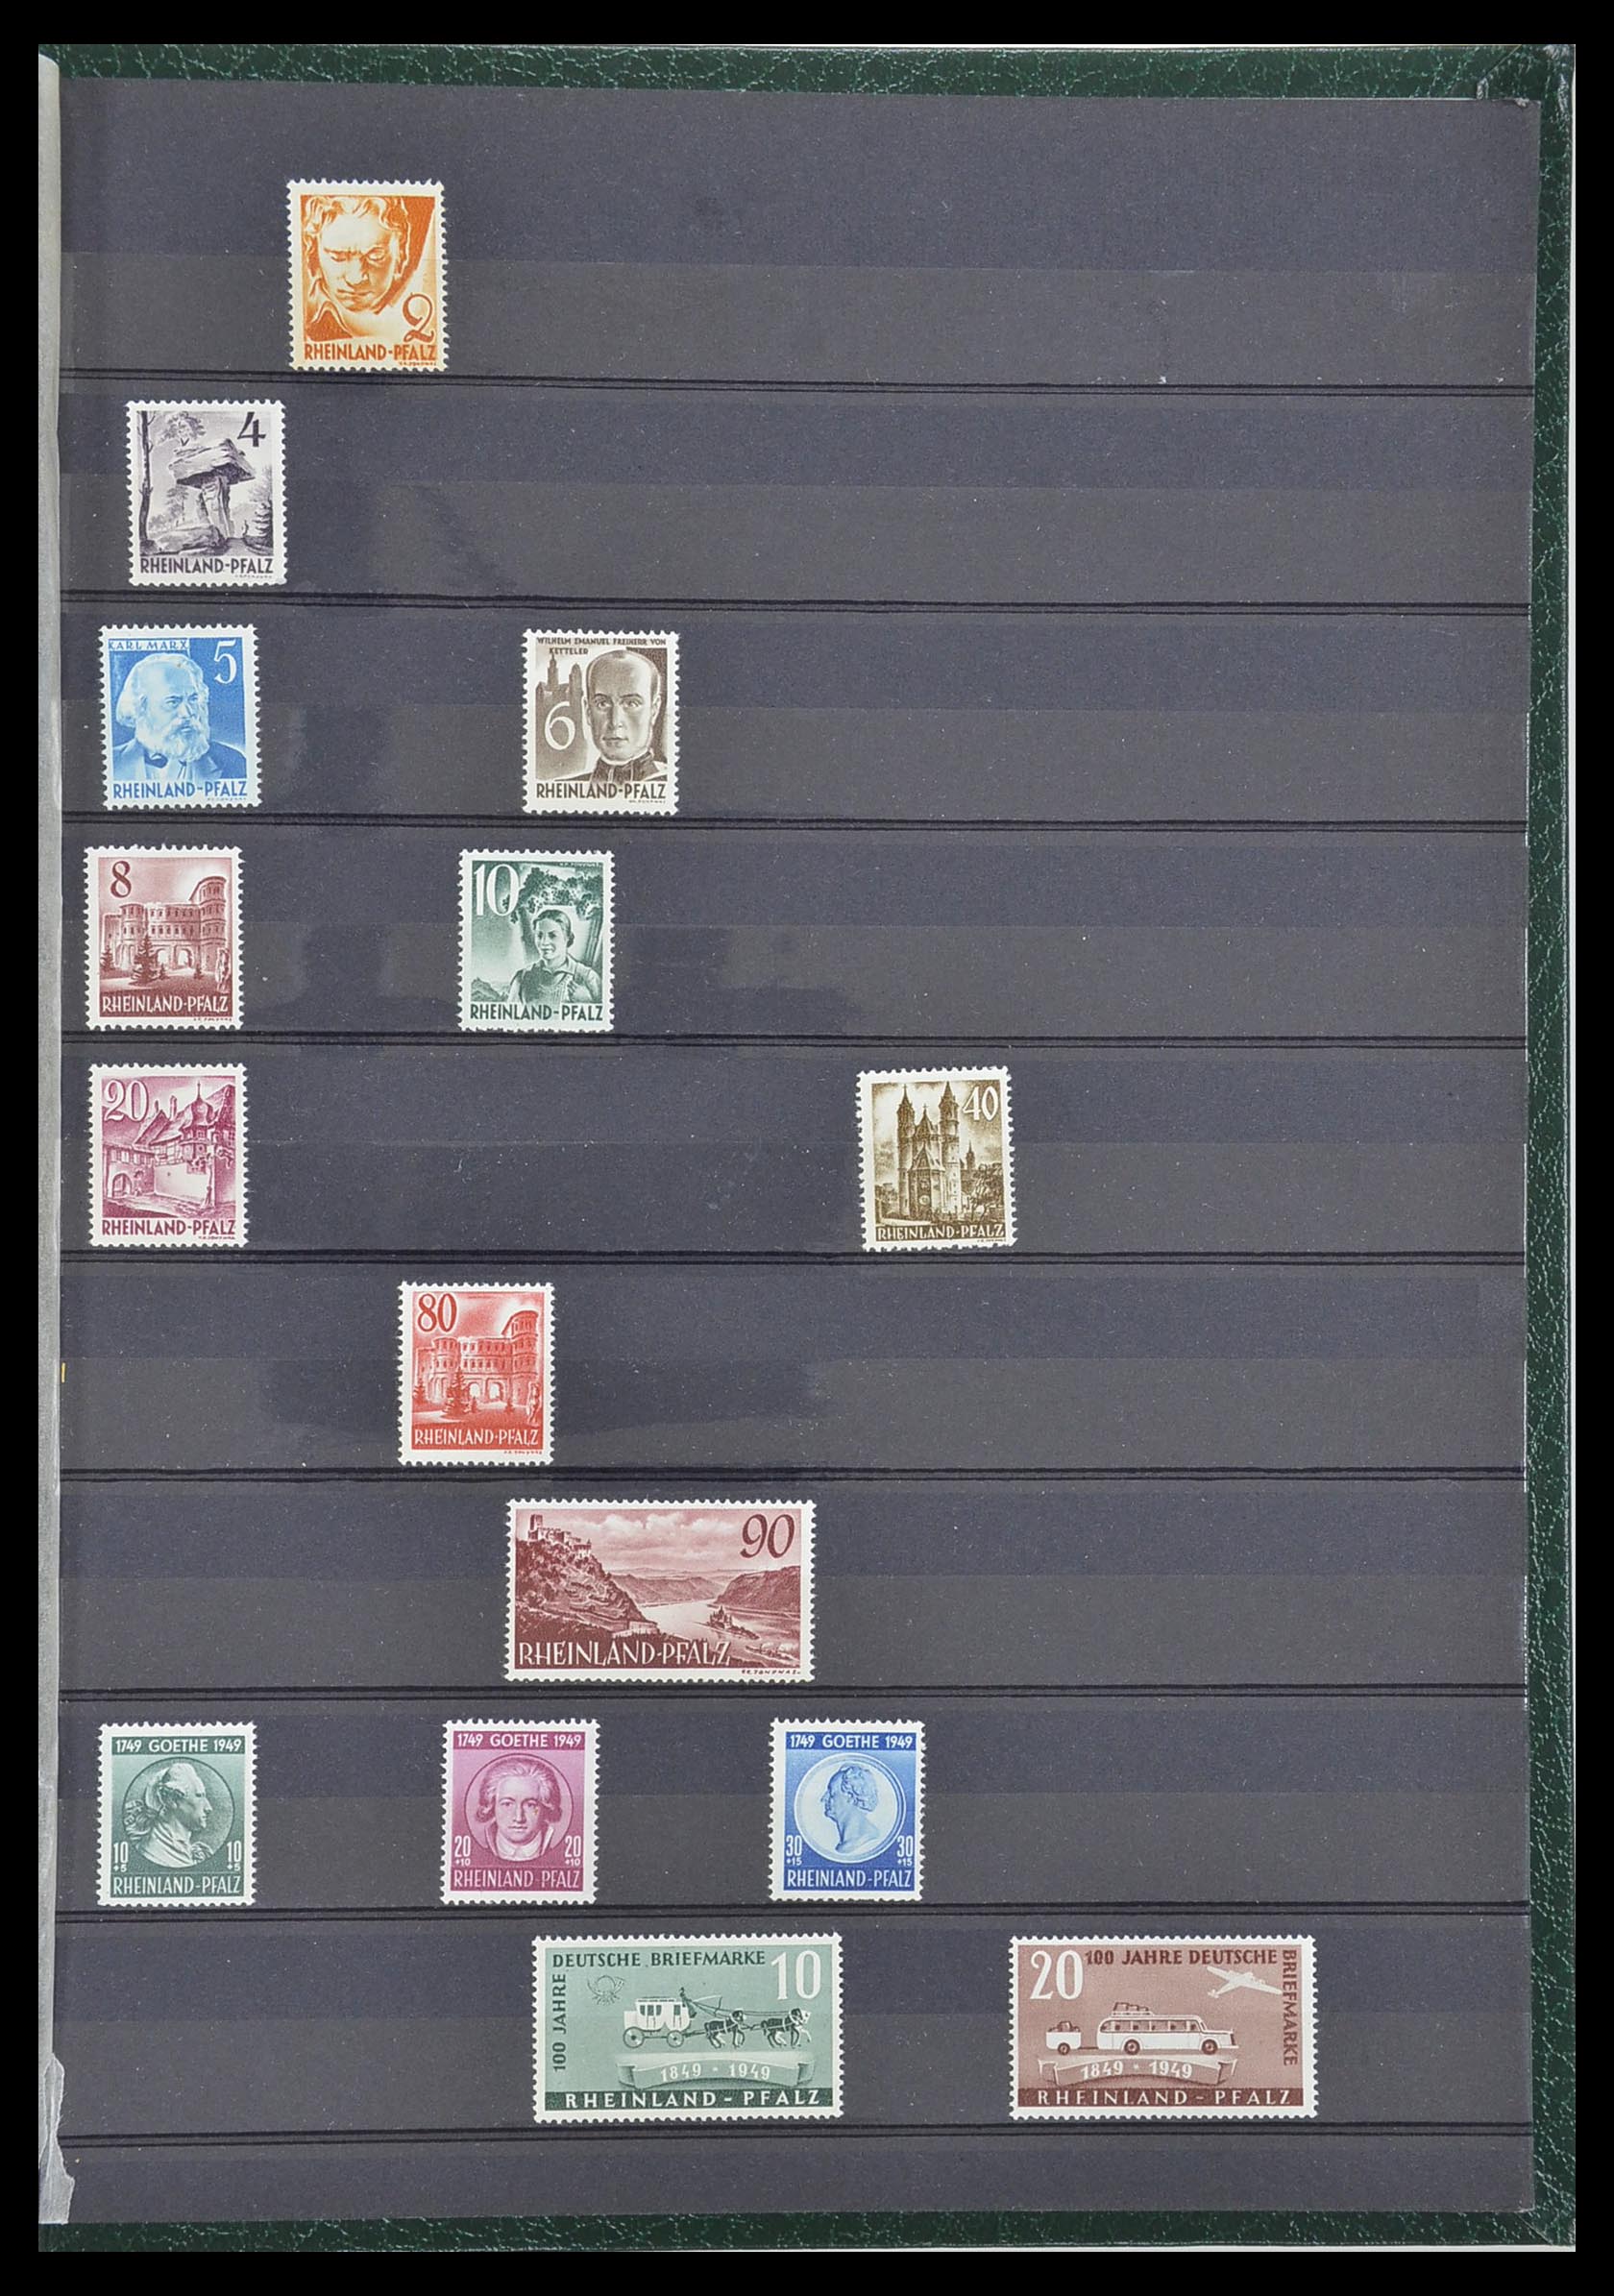 33553 084 - Stamp collection 33553 German territories and occupations 1939-1948.